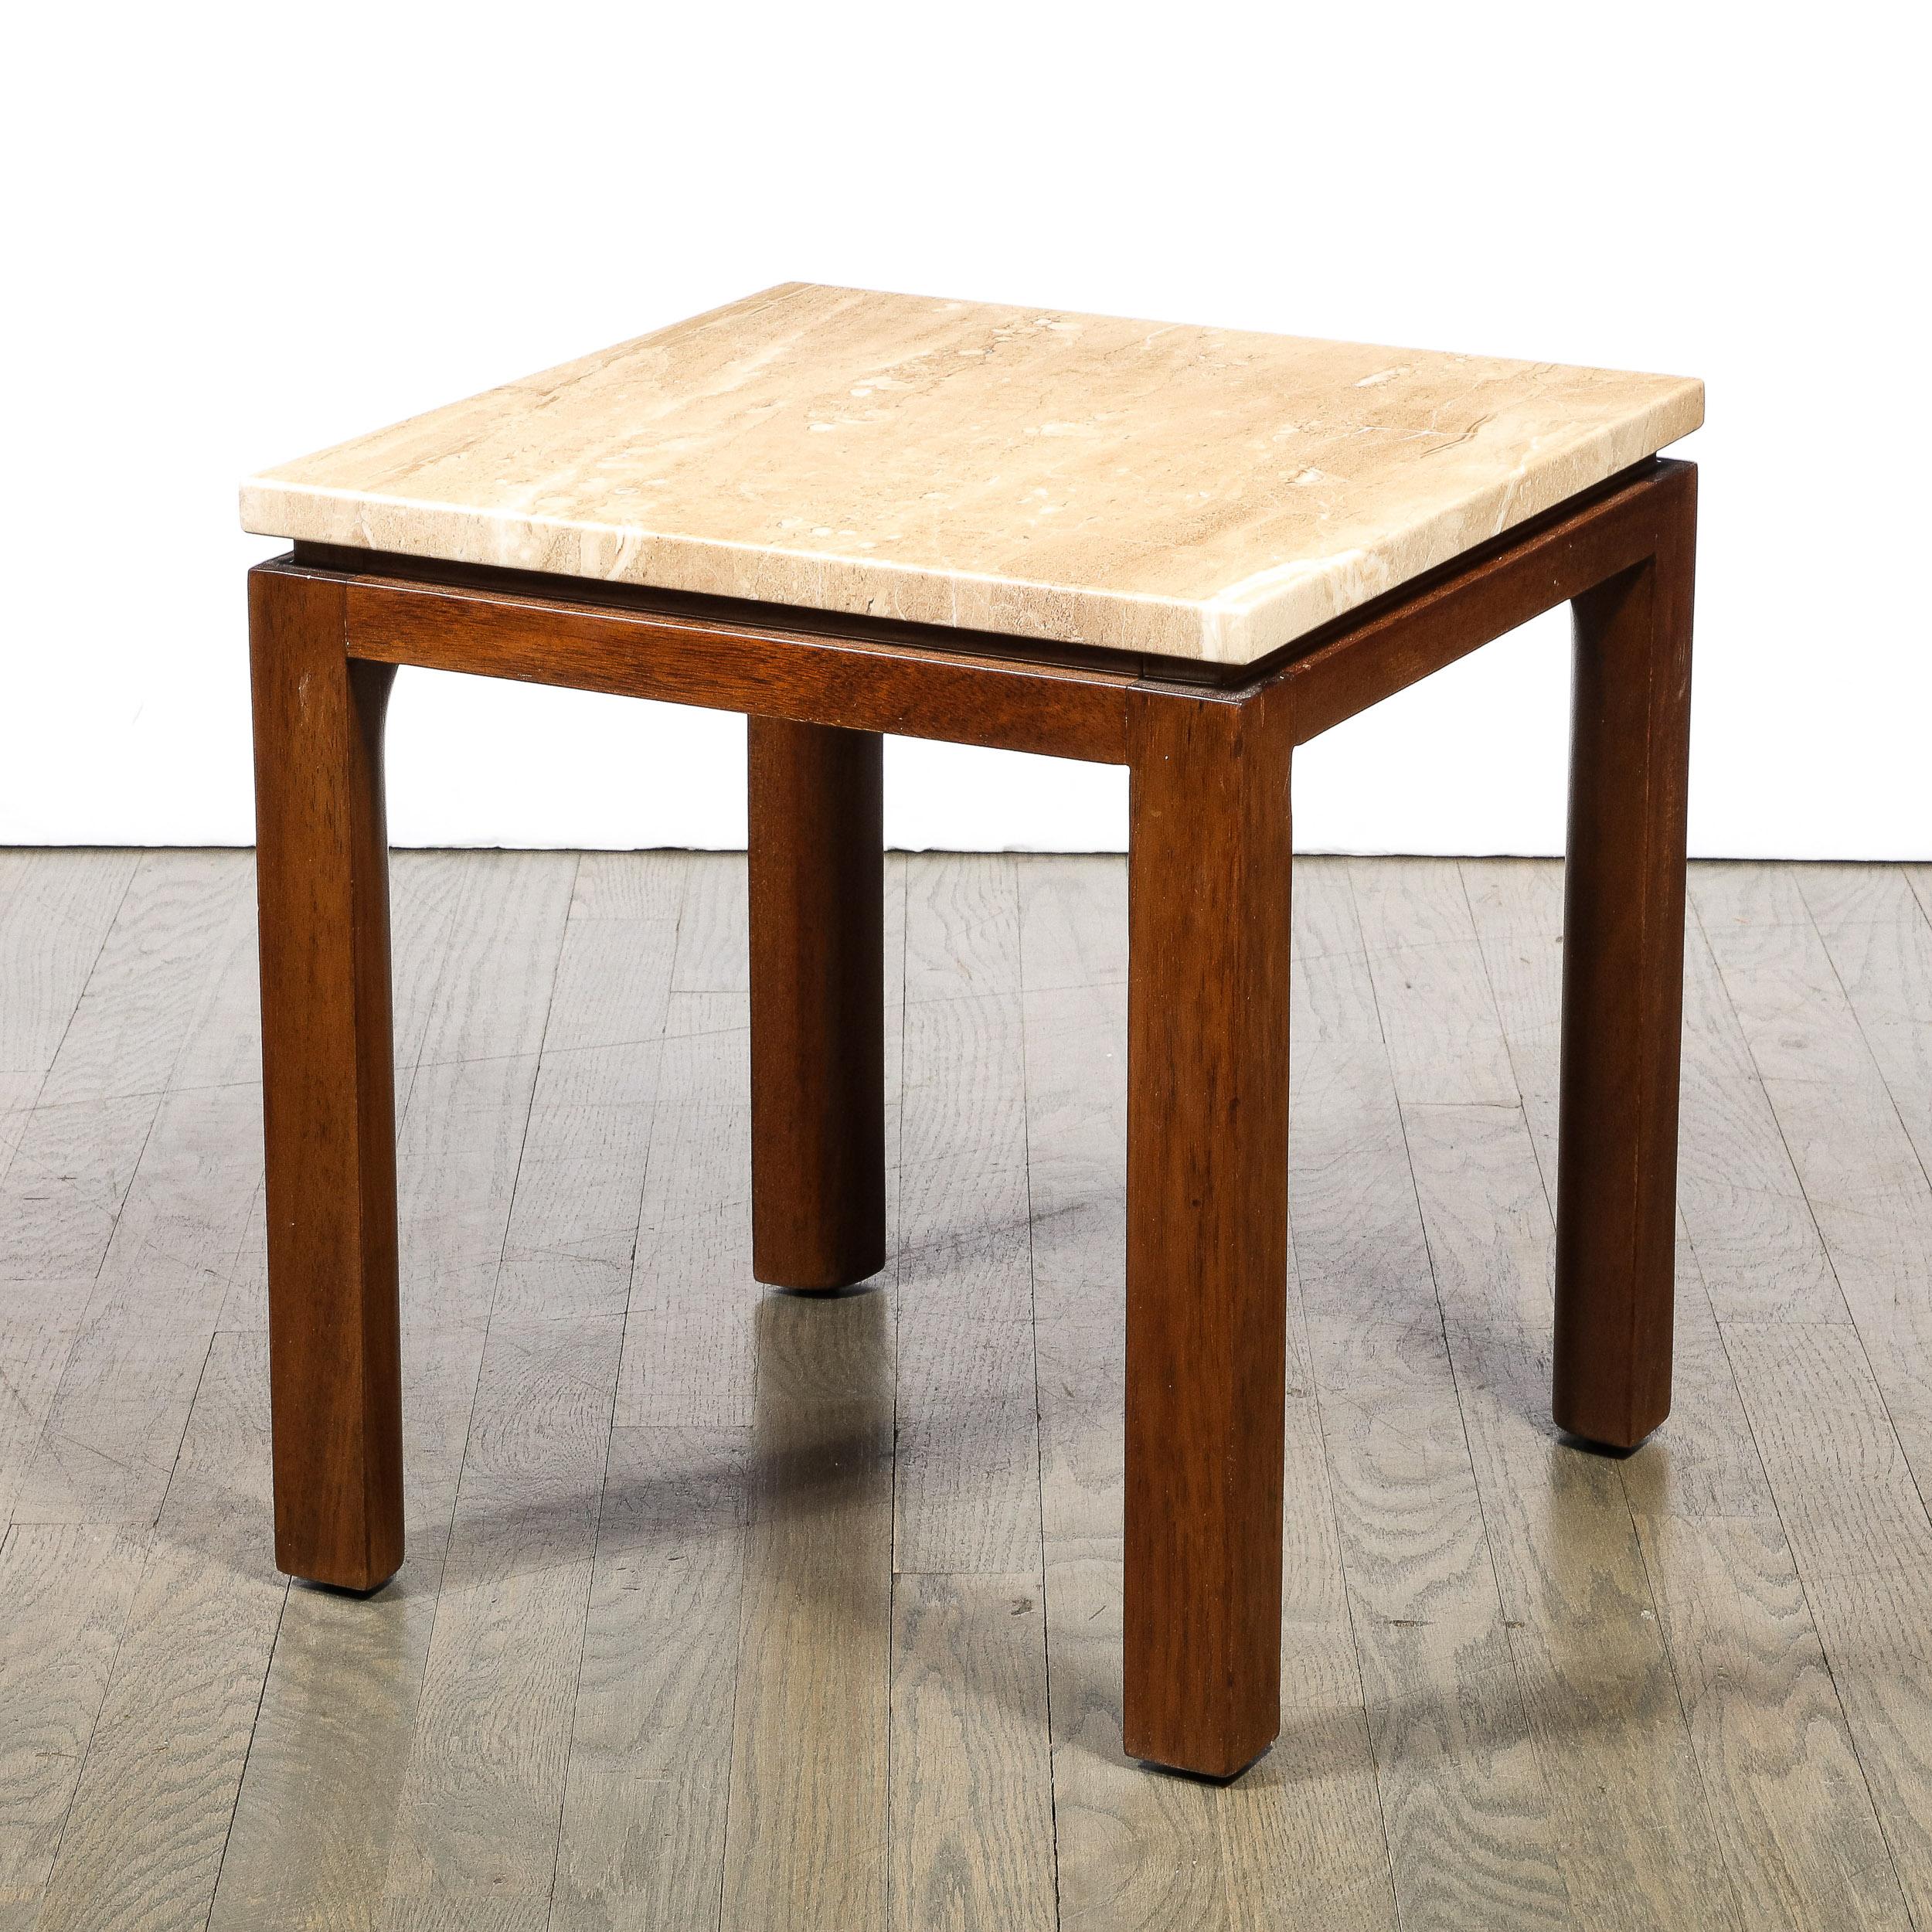 Mid-Century Modernist Side Table in Walnut & Travertine Marble by Harvey Probber For Sale 2